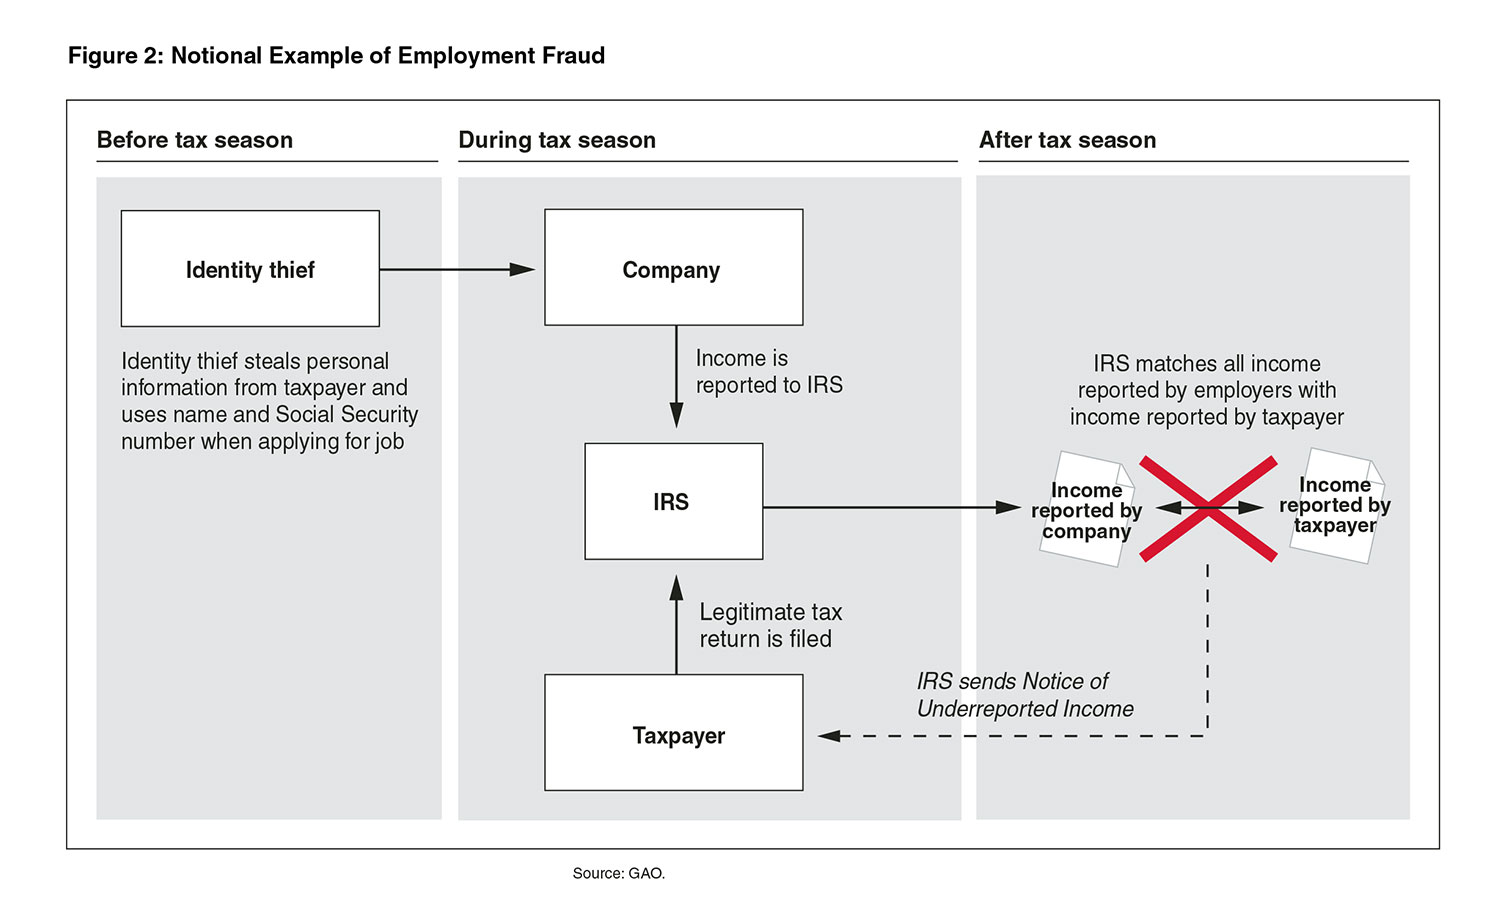 Notional Example of Employment Fraud graphic